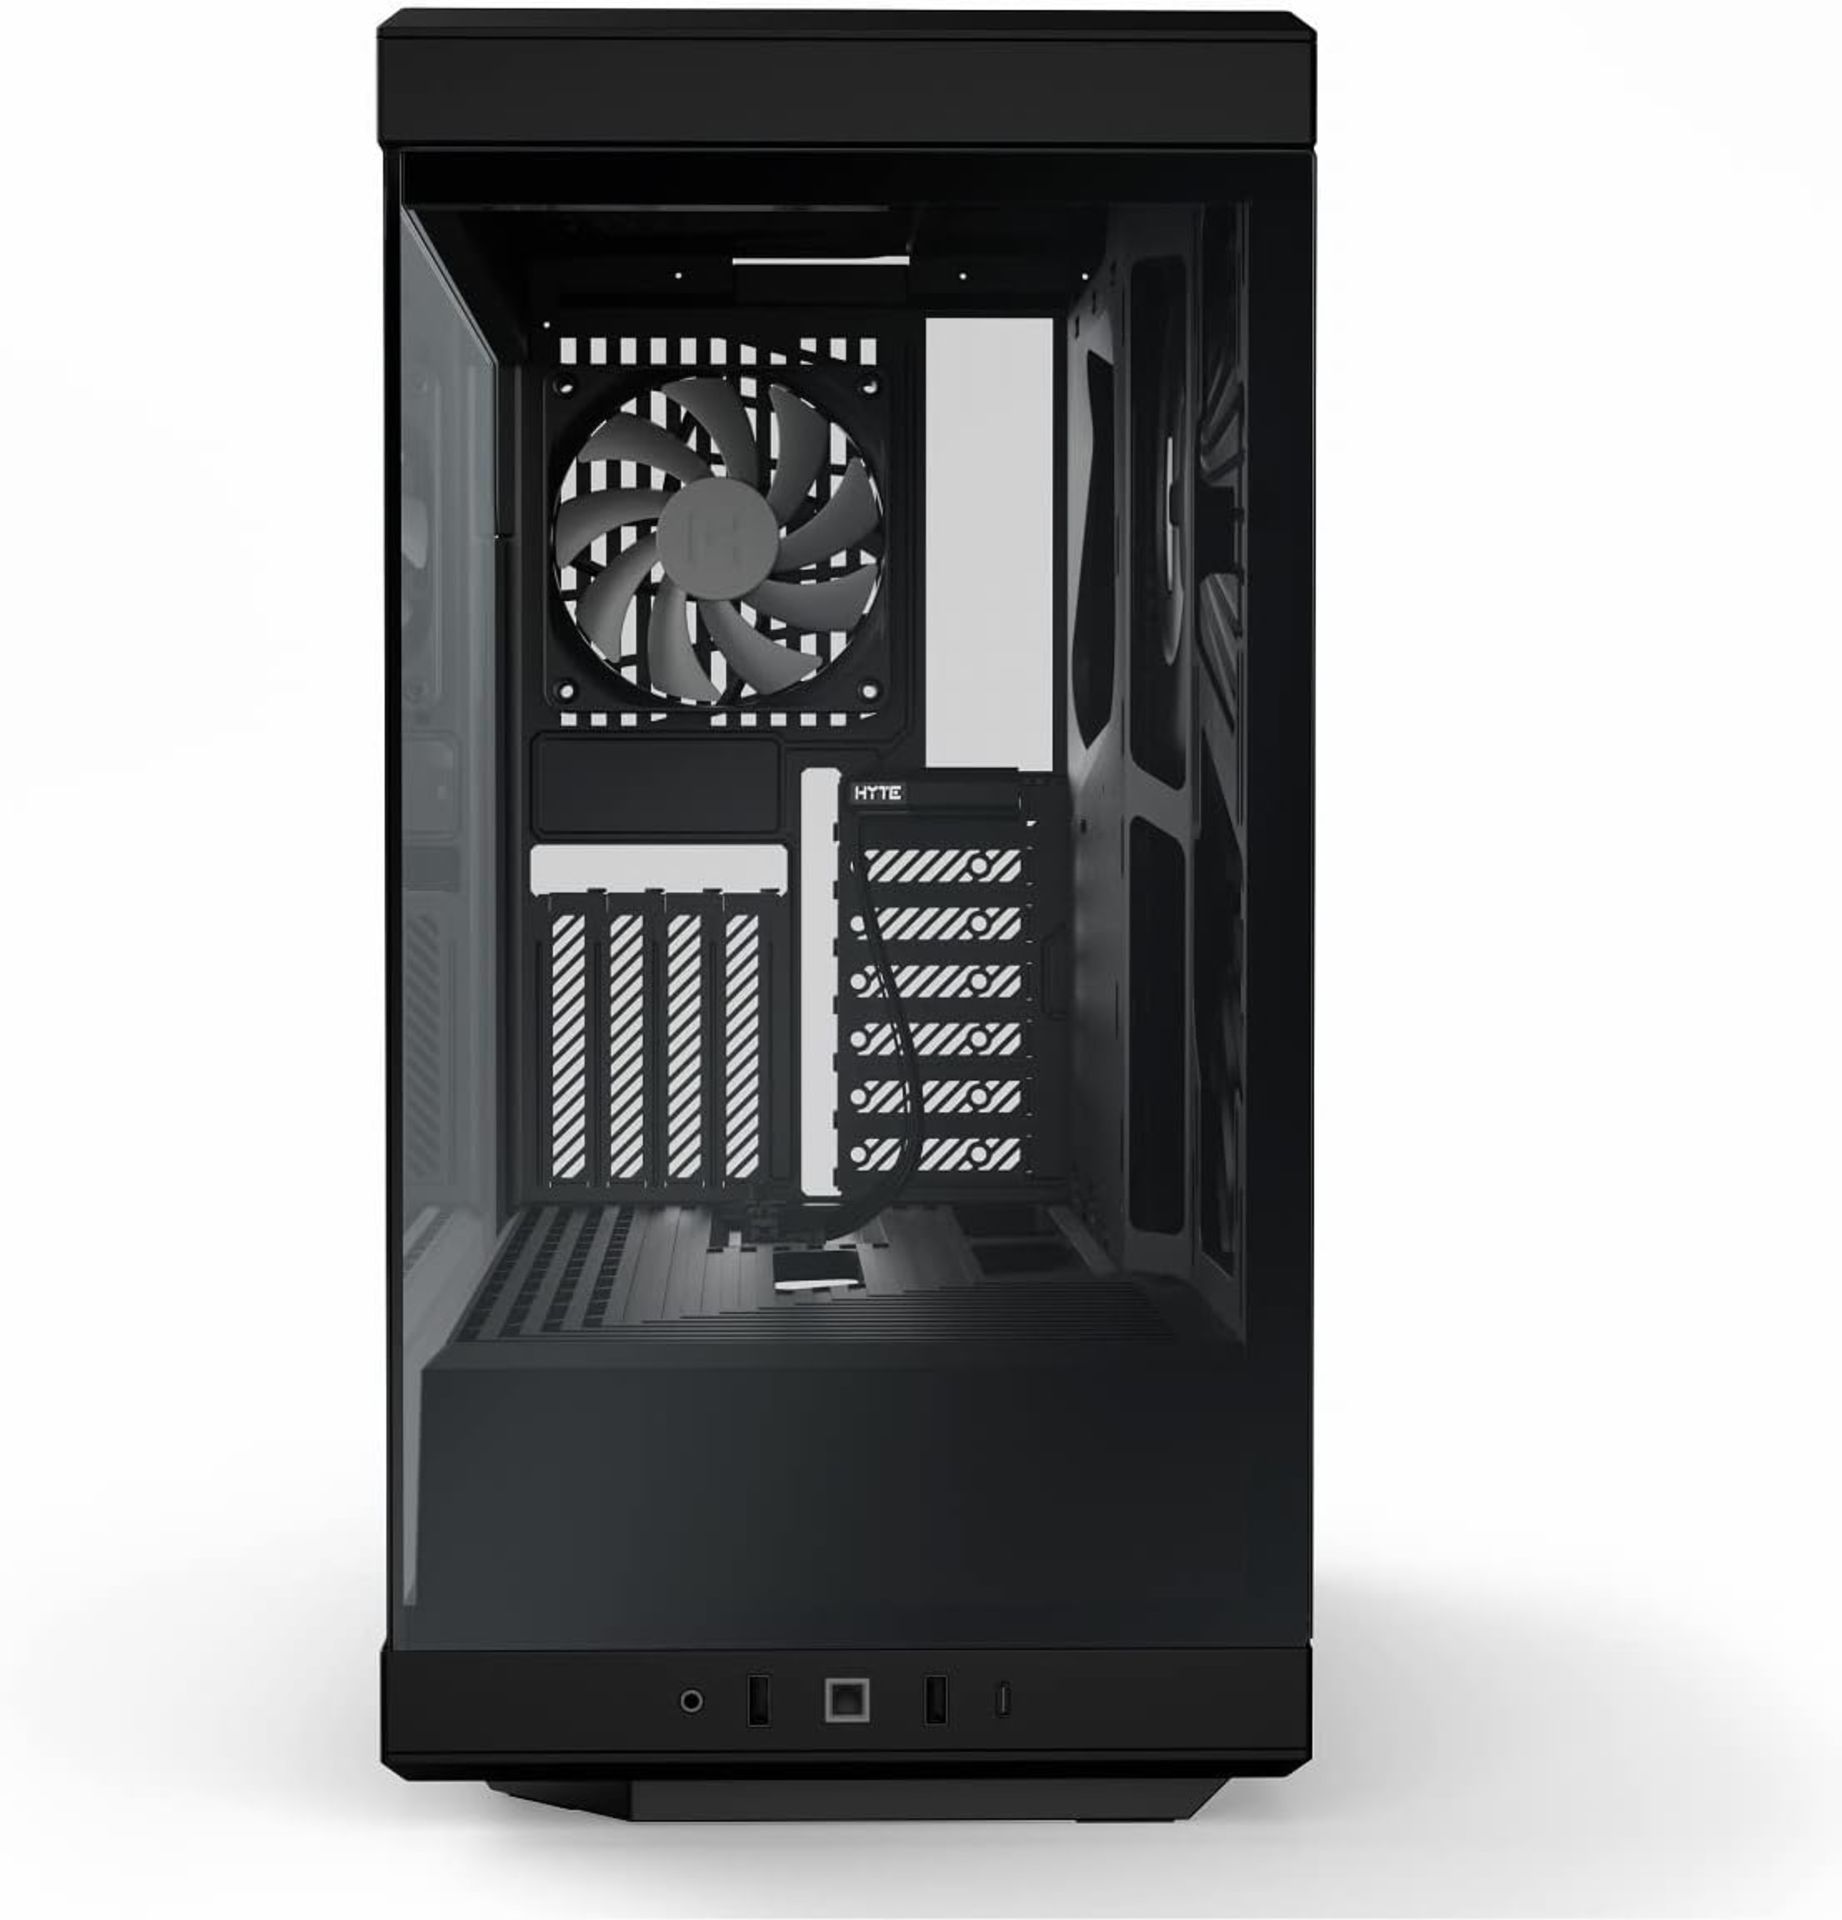 NEW & BOXED HYTE Y40 Mid-Tower ATX Case - Black. RRP £159.98. (R15R). The HYTE Y40 Mid-Tower ATX - Bild 2 aus 5